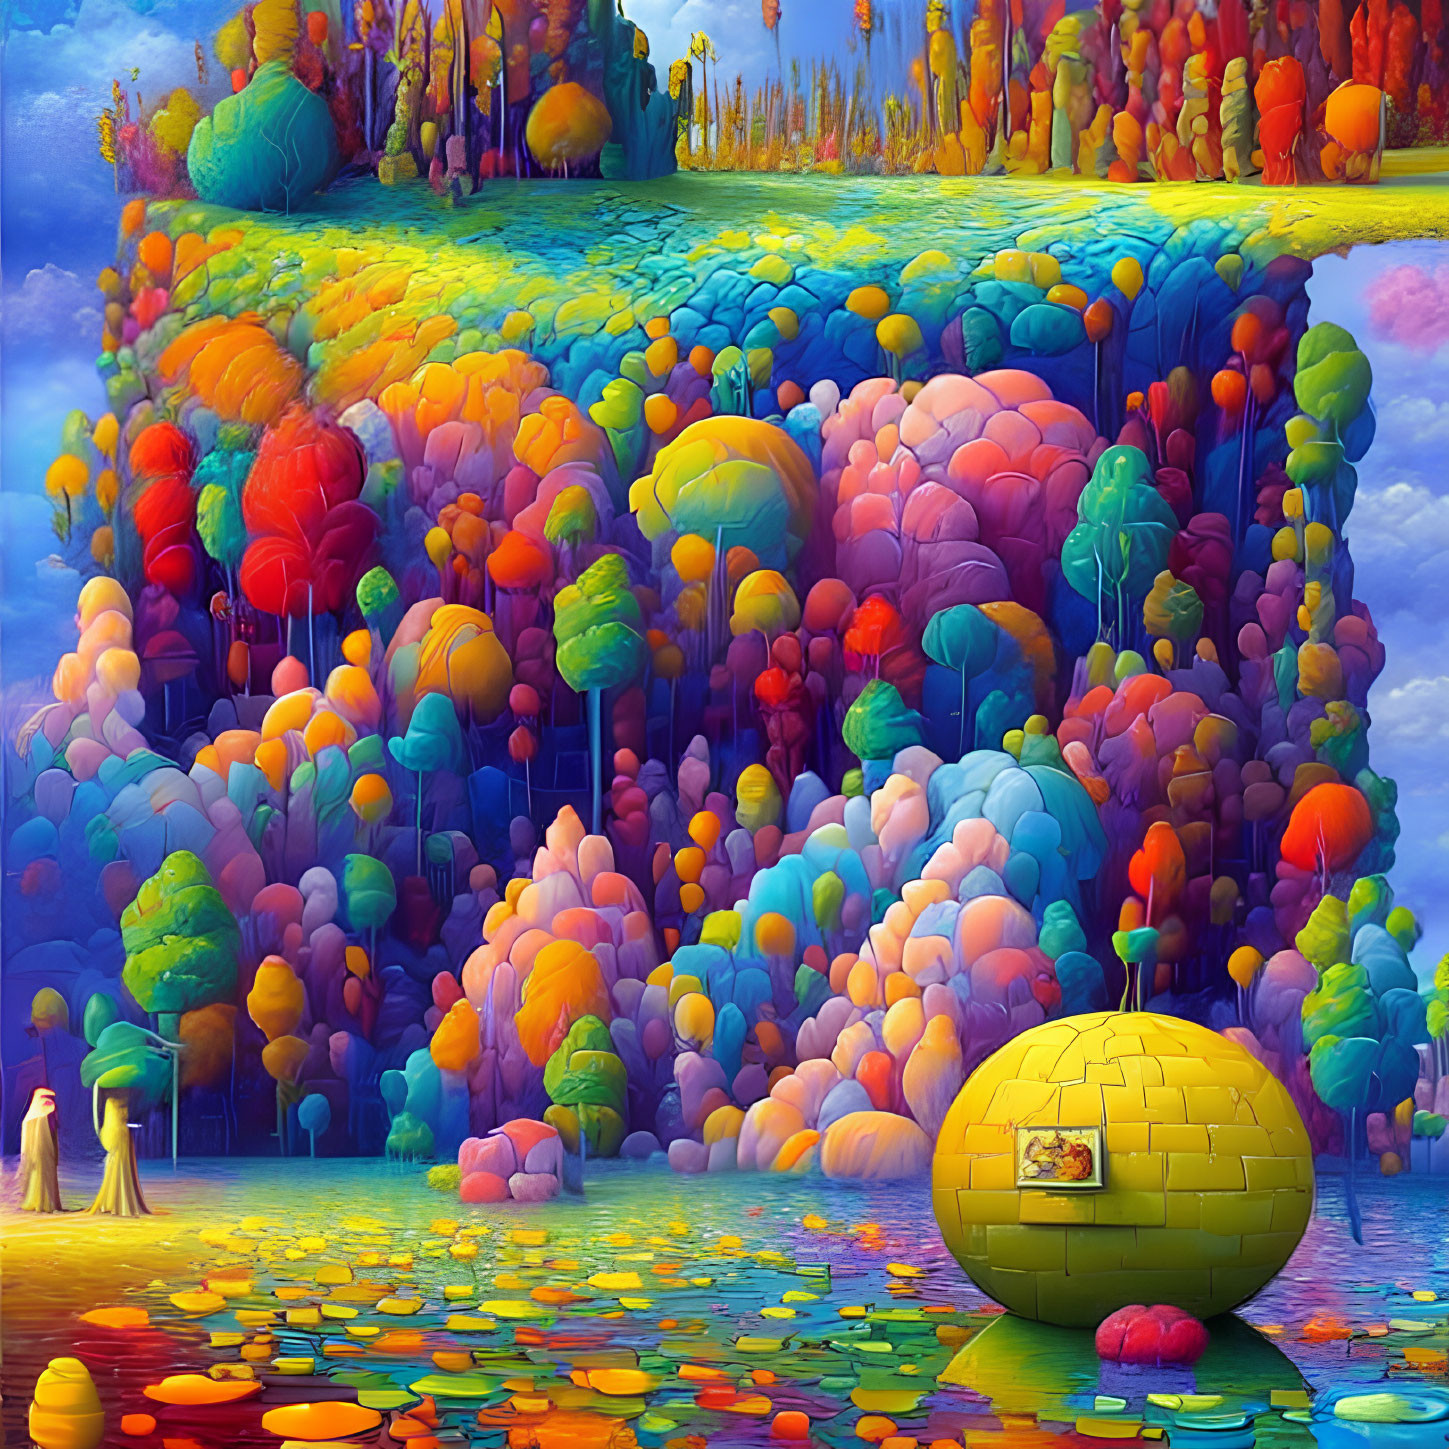 Colorful surreal landscape with balloon-like trees, yellow structure, and ethereal figures